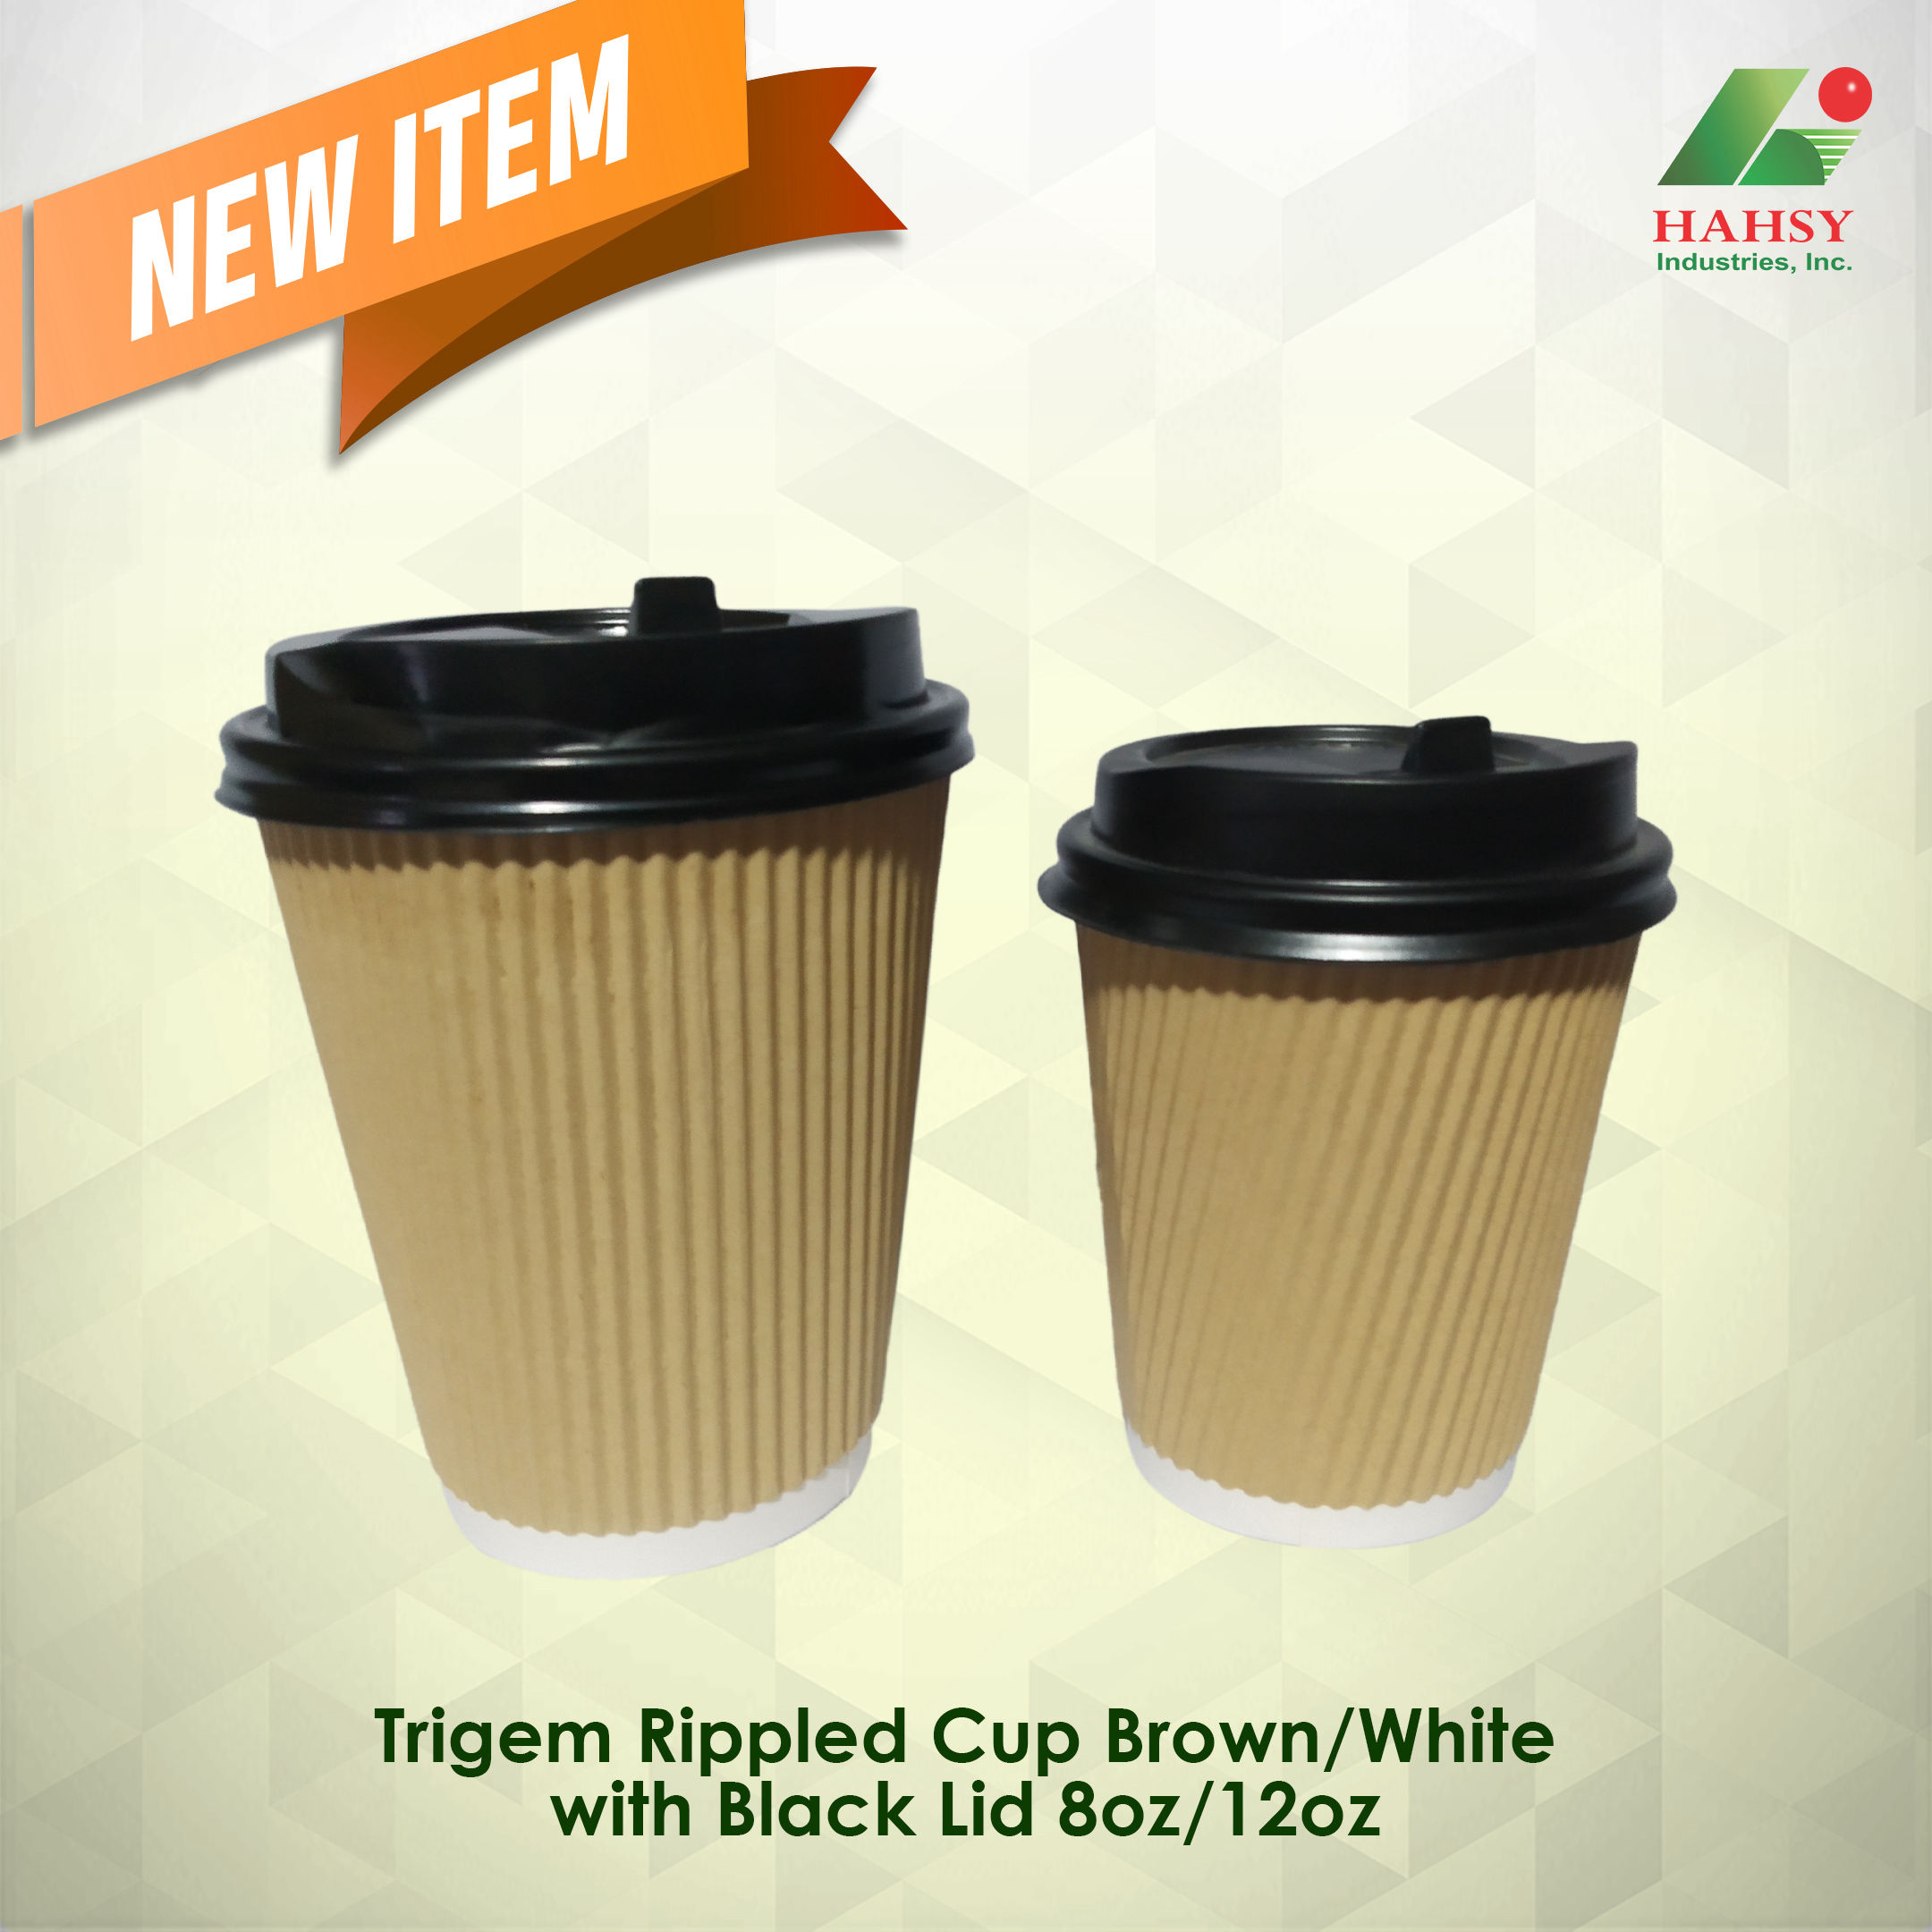 https://www.hahsyindustries.com/assets/images/trigem-rippled-cup-brown-white-with-black-lid-8oz-12oz-2160x2160.jpg